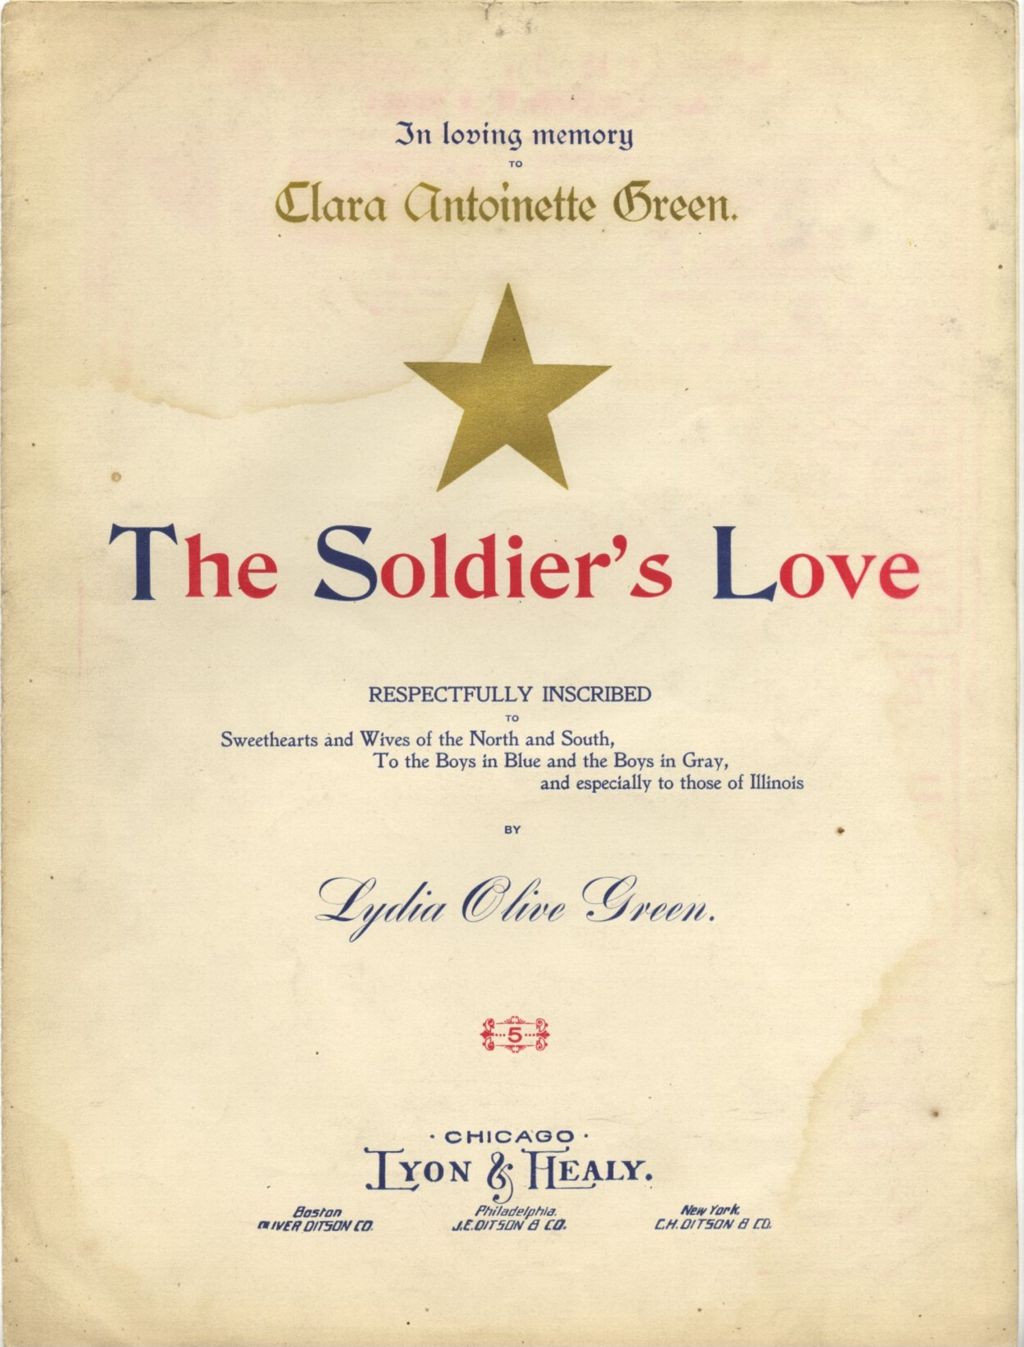 Miniature of Soldier's Love